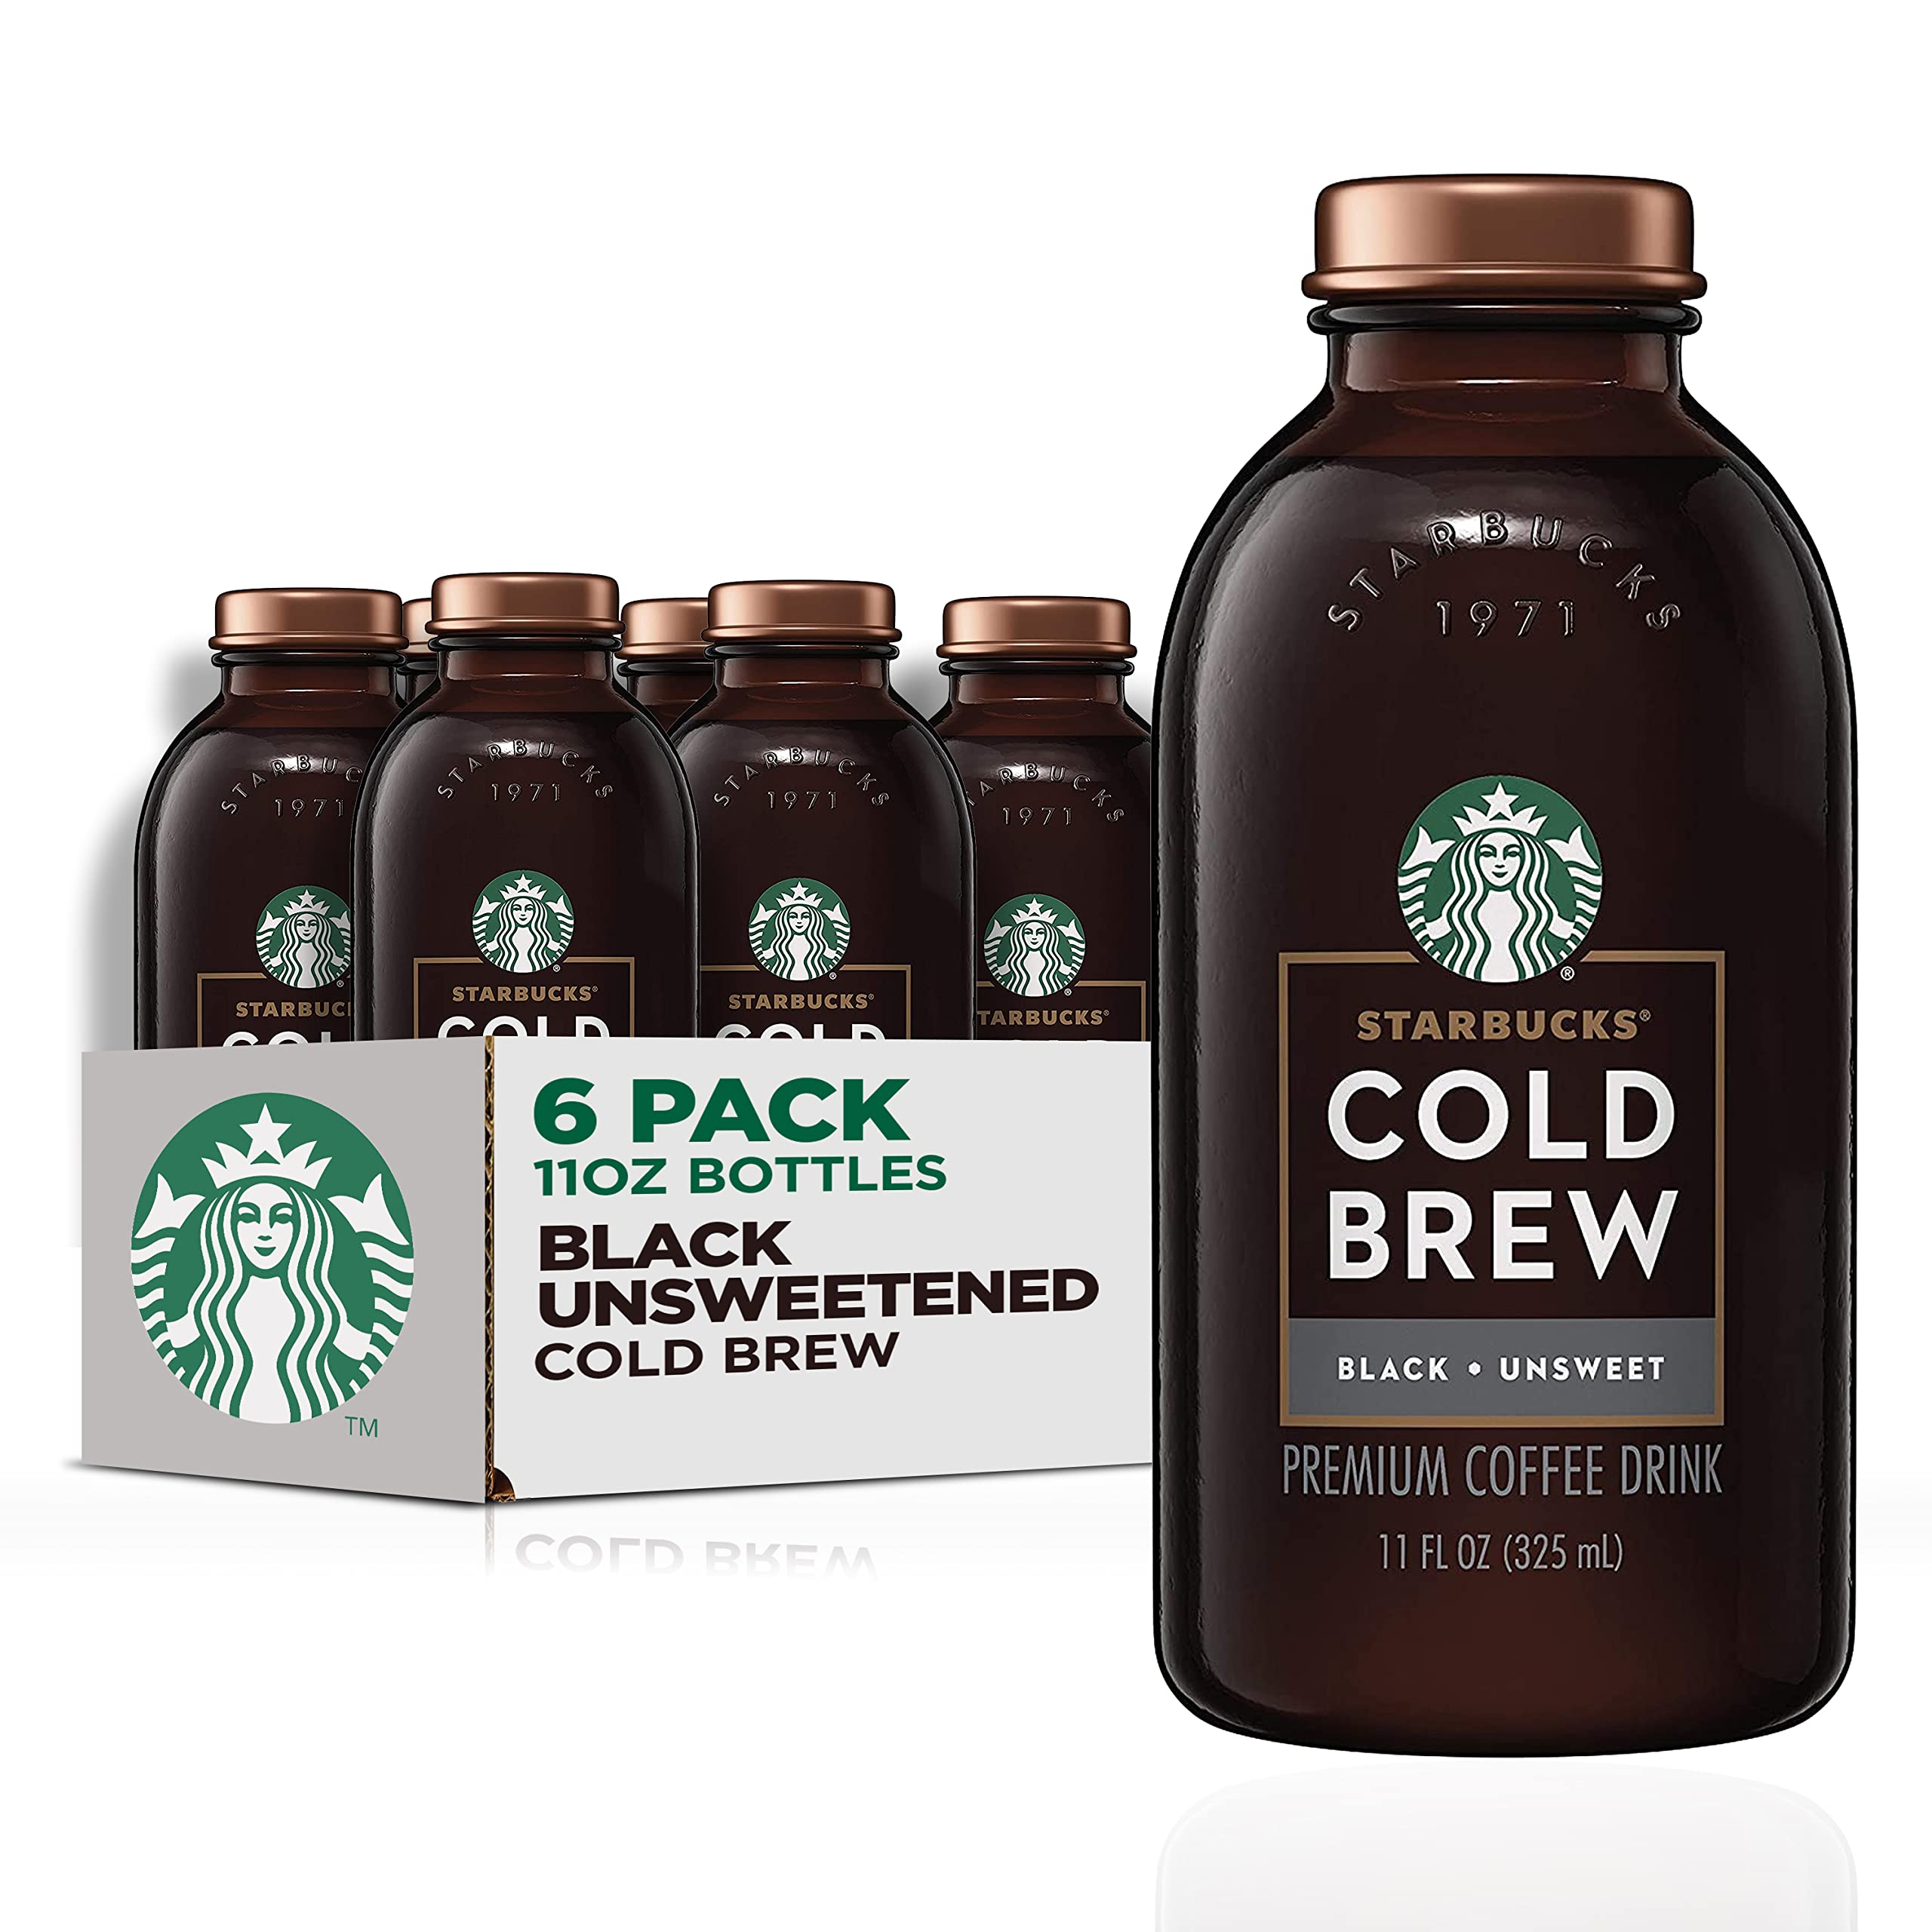 Starbucks Cold Brew Coffee, Black Unsweetened, 11 oz Glass Bottles, 6 Count  Black Unsweetened 11 Fl